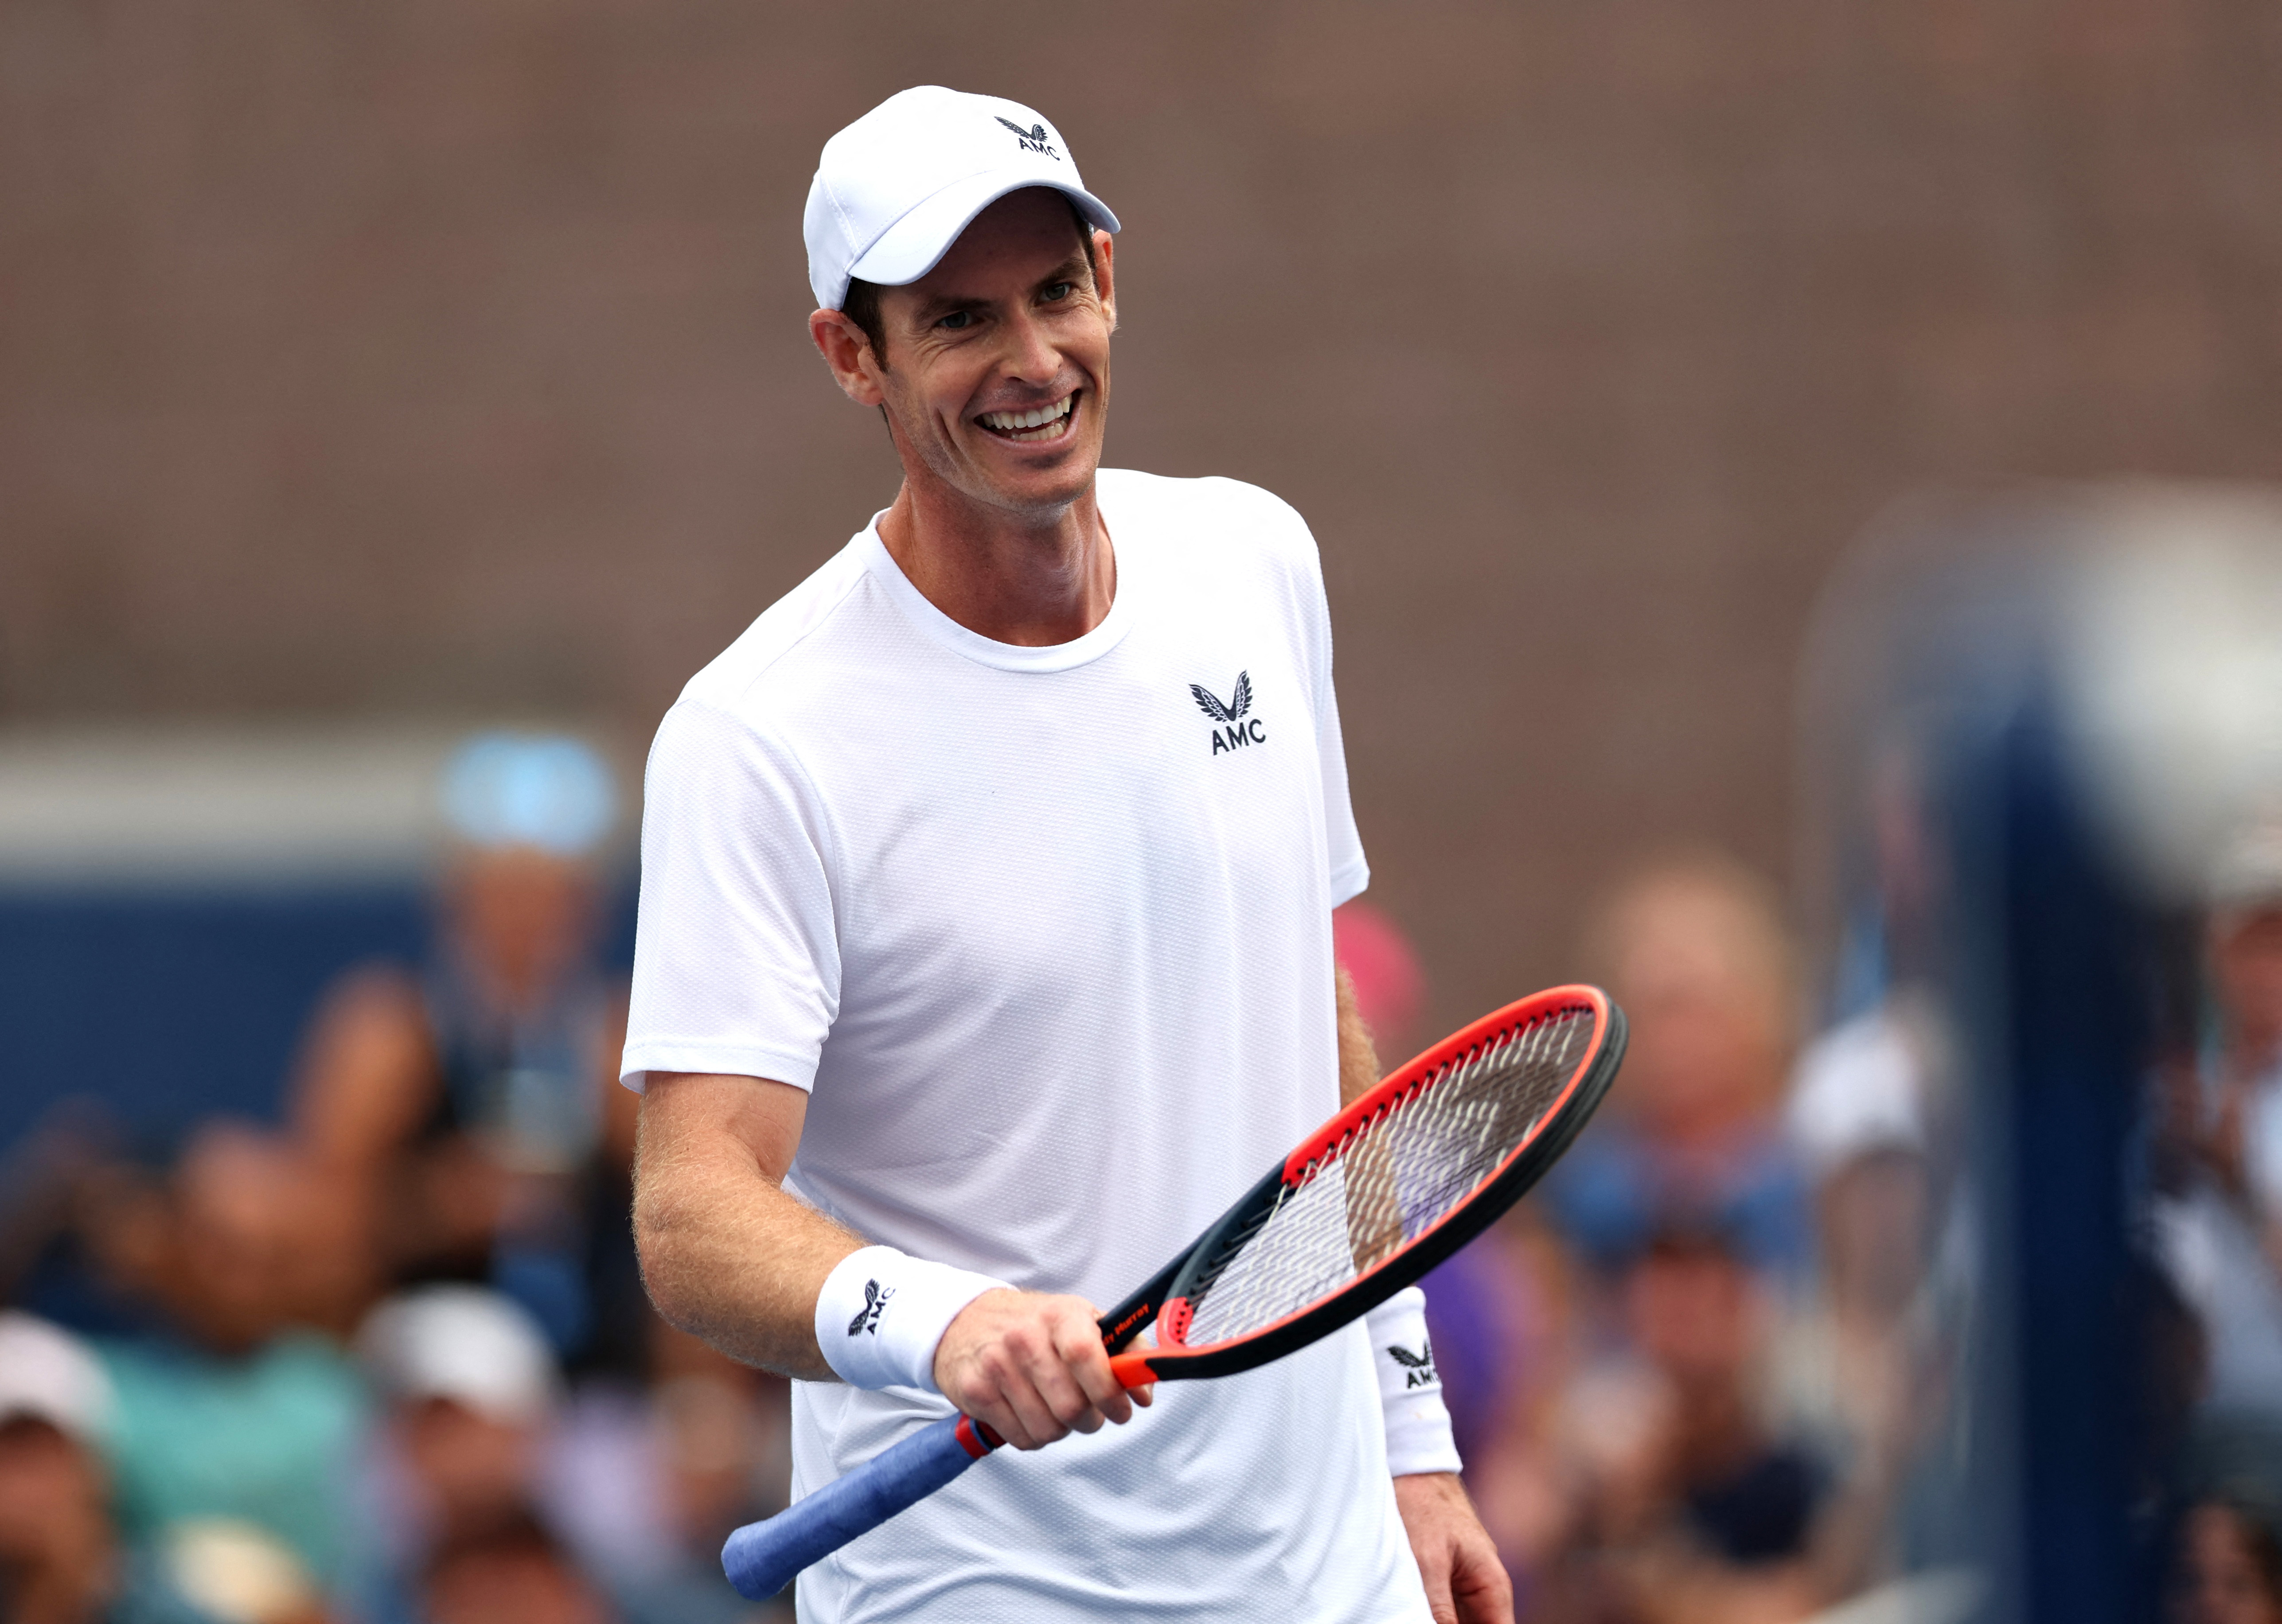 US Open a family affair for Murray, who records 200th major win Reuters